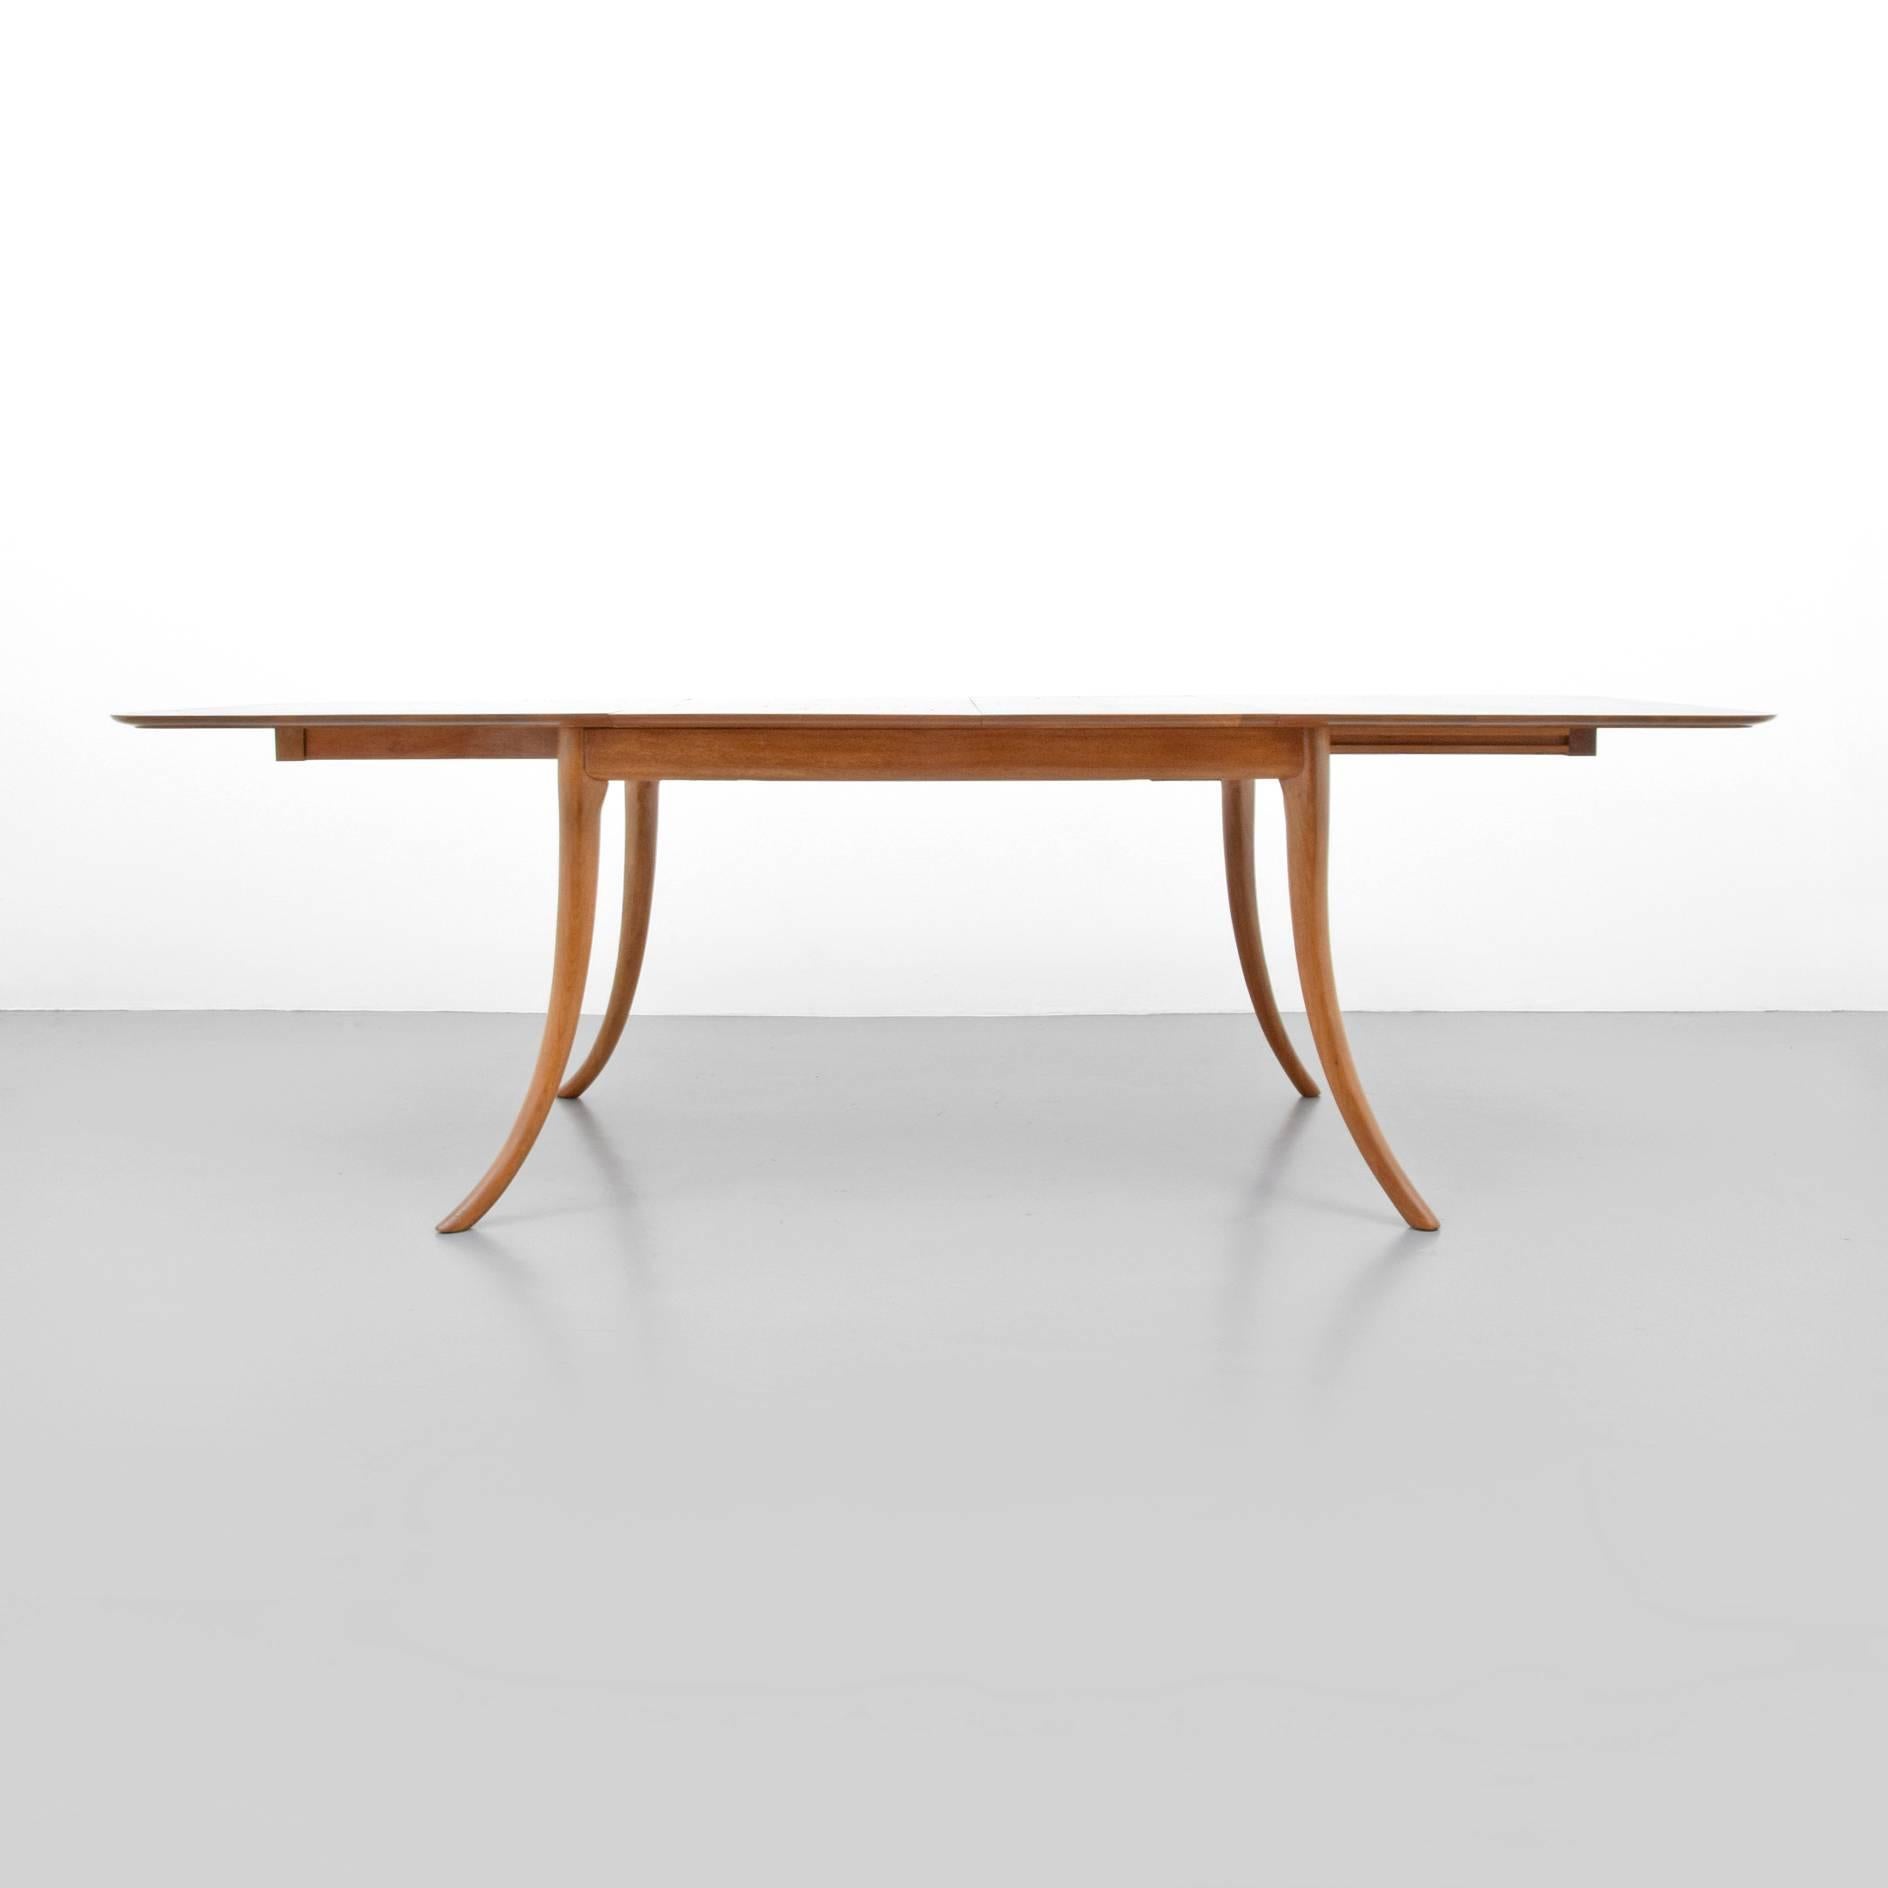 Dining table by T.H. Robsjohn Gibbings for Widdicomb. Table is model #4309, has saber/splayed legs and two leaves. Table is marked.

Dimensions: 29" H, 93.75" W, 38" D, 57.75" W without leaves, leaves are 16" W &